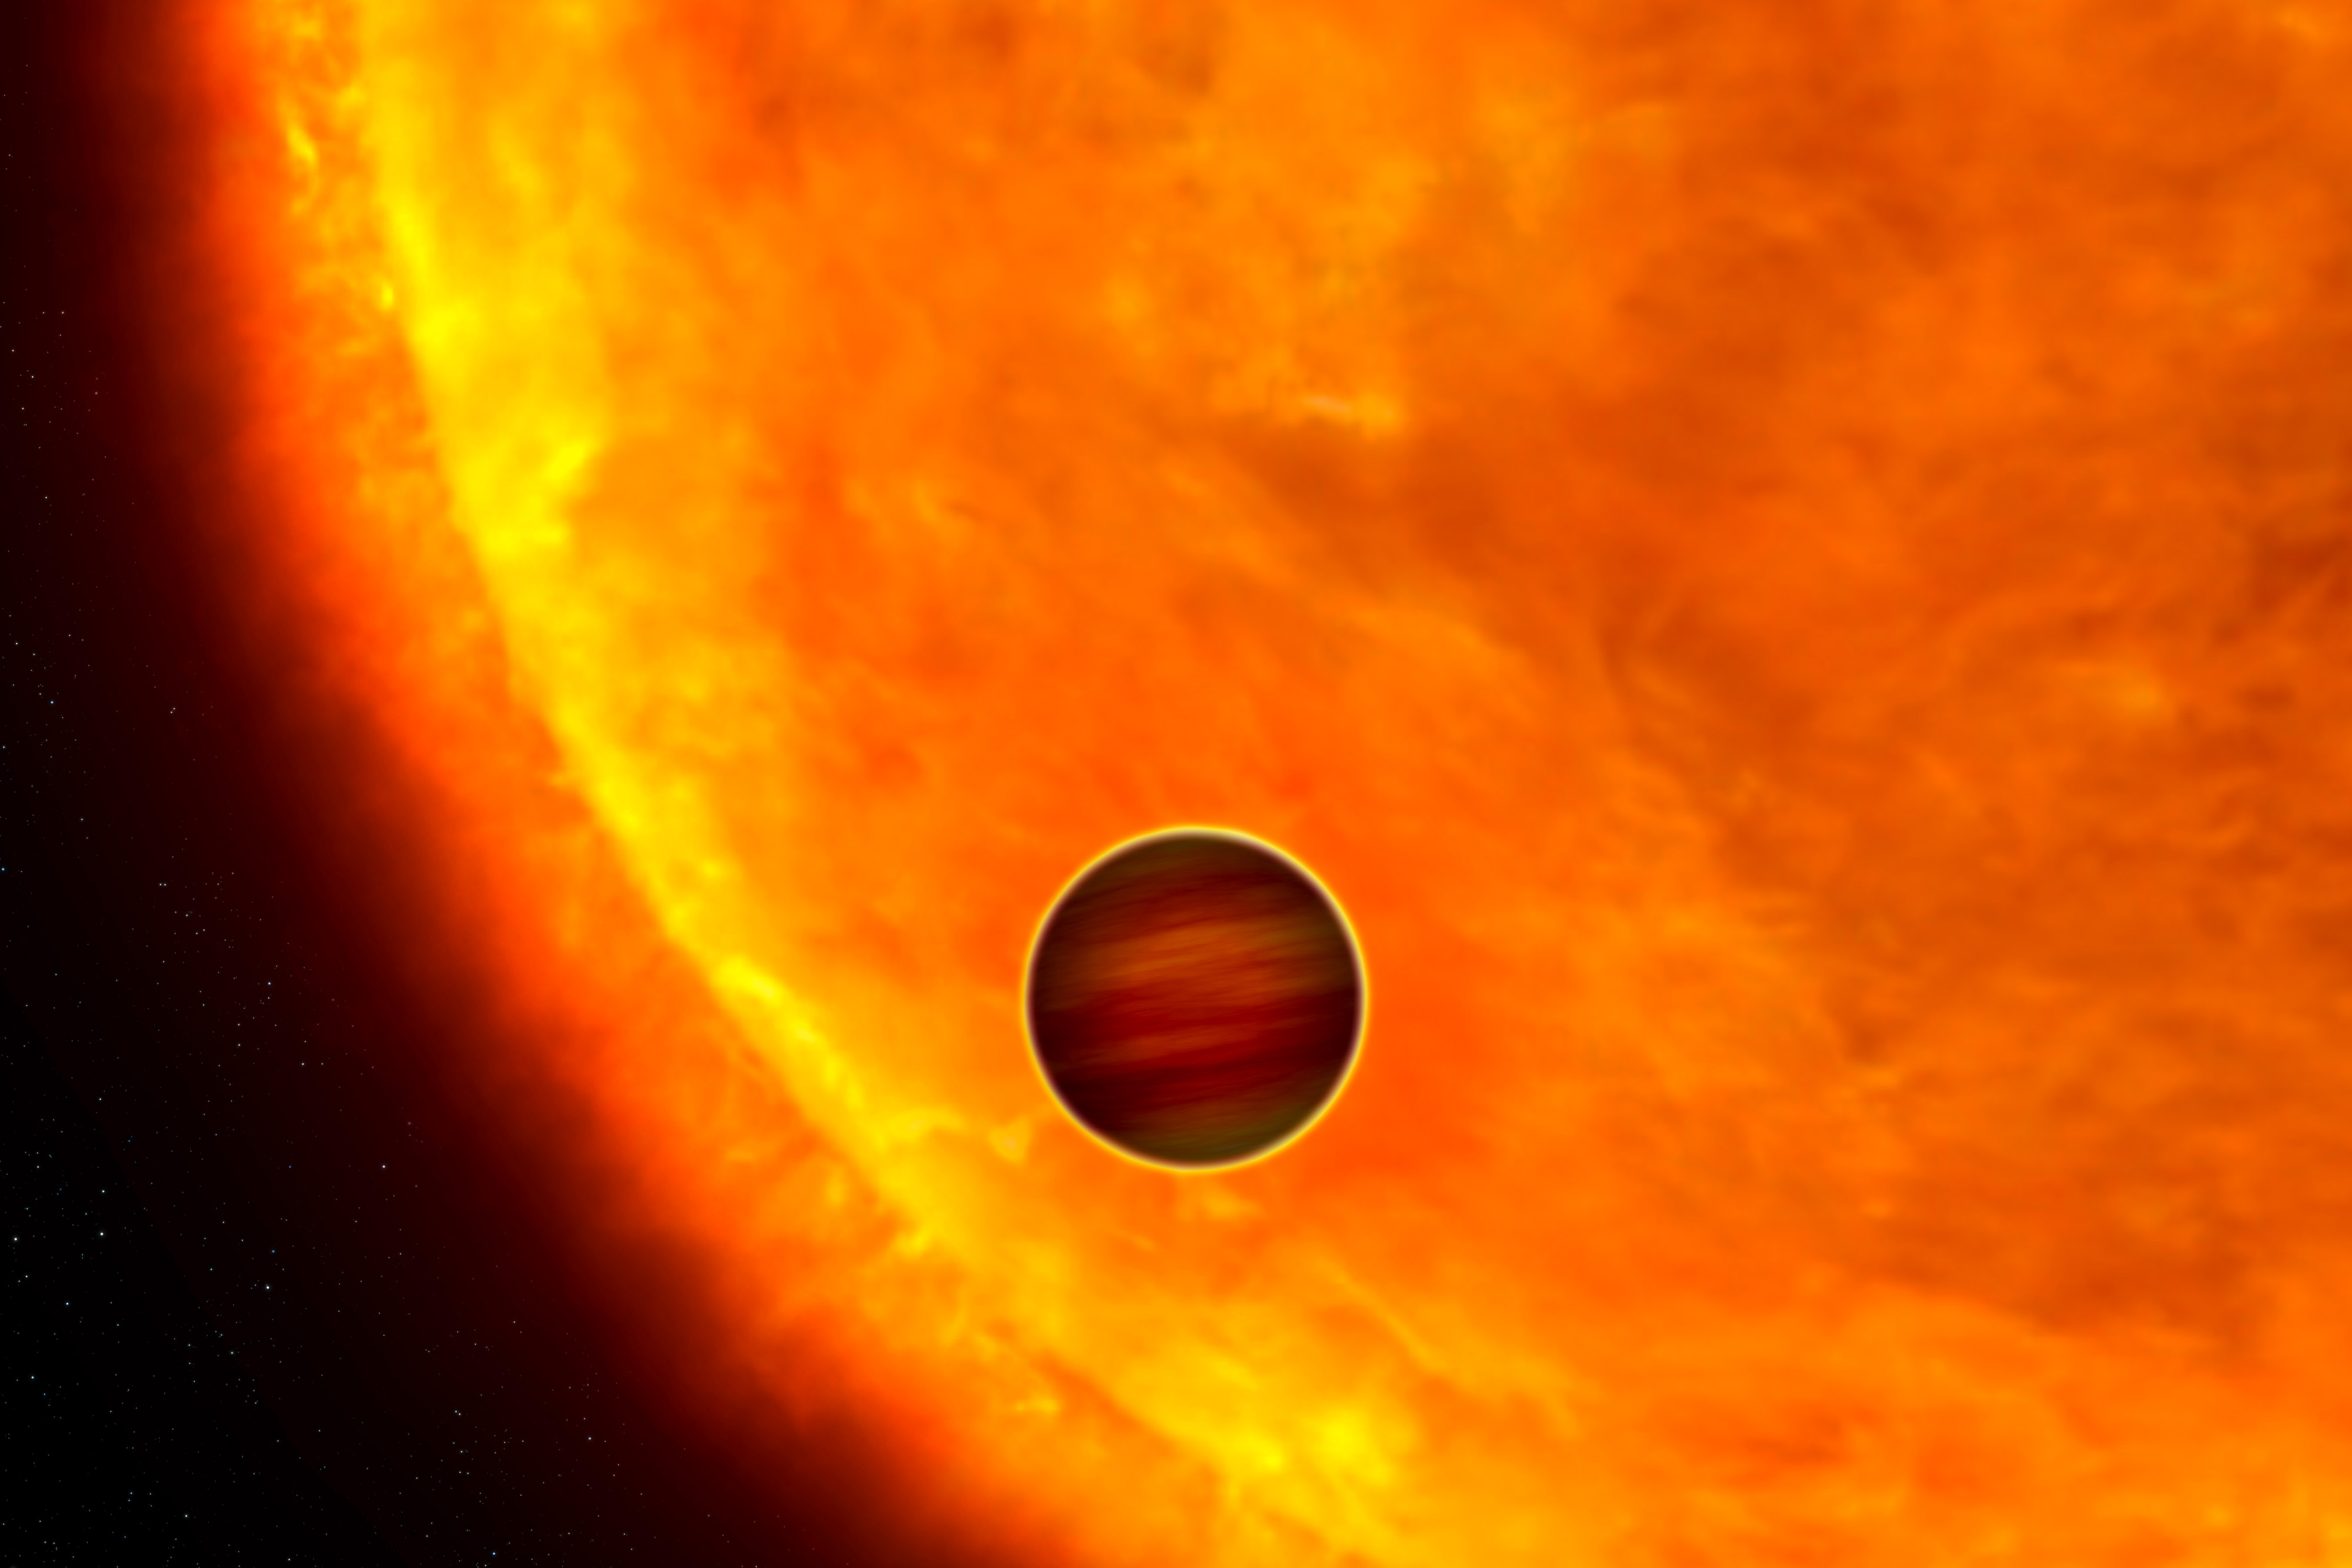 planet red giant and sun side by side